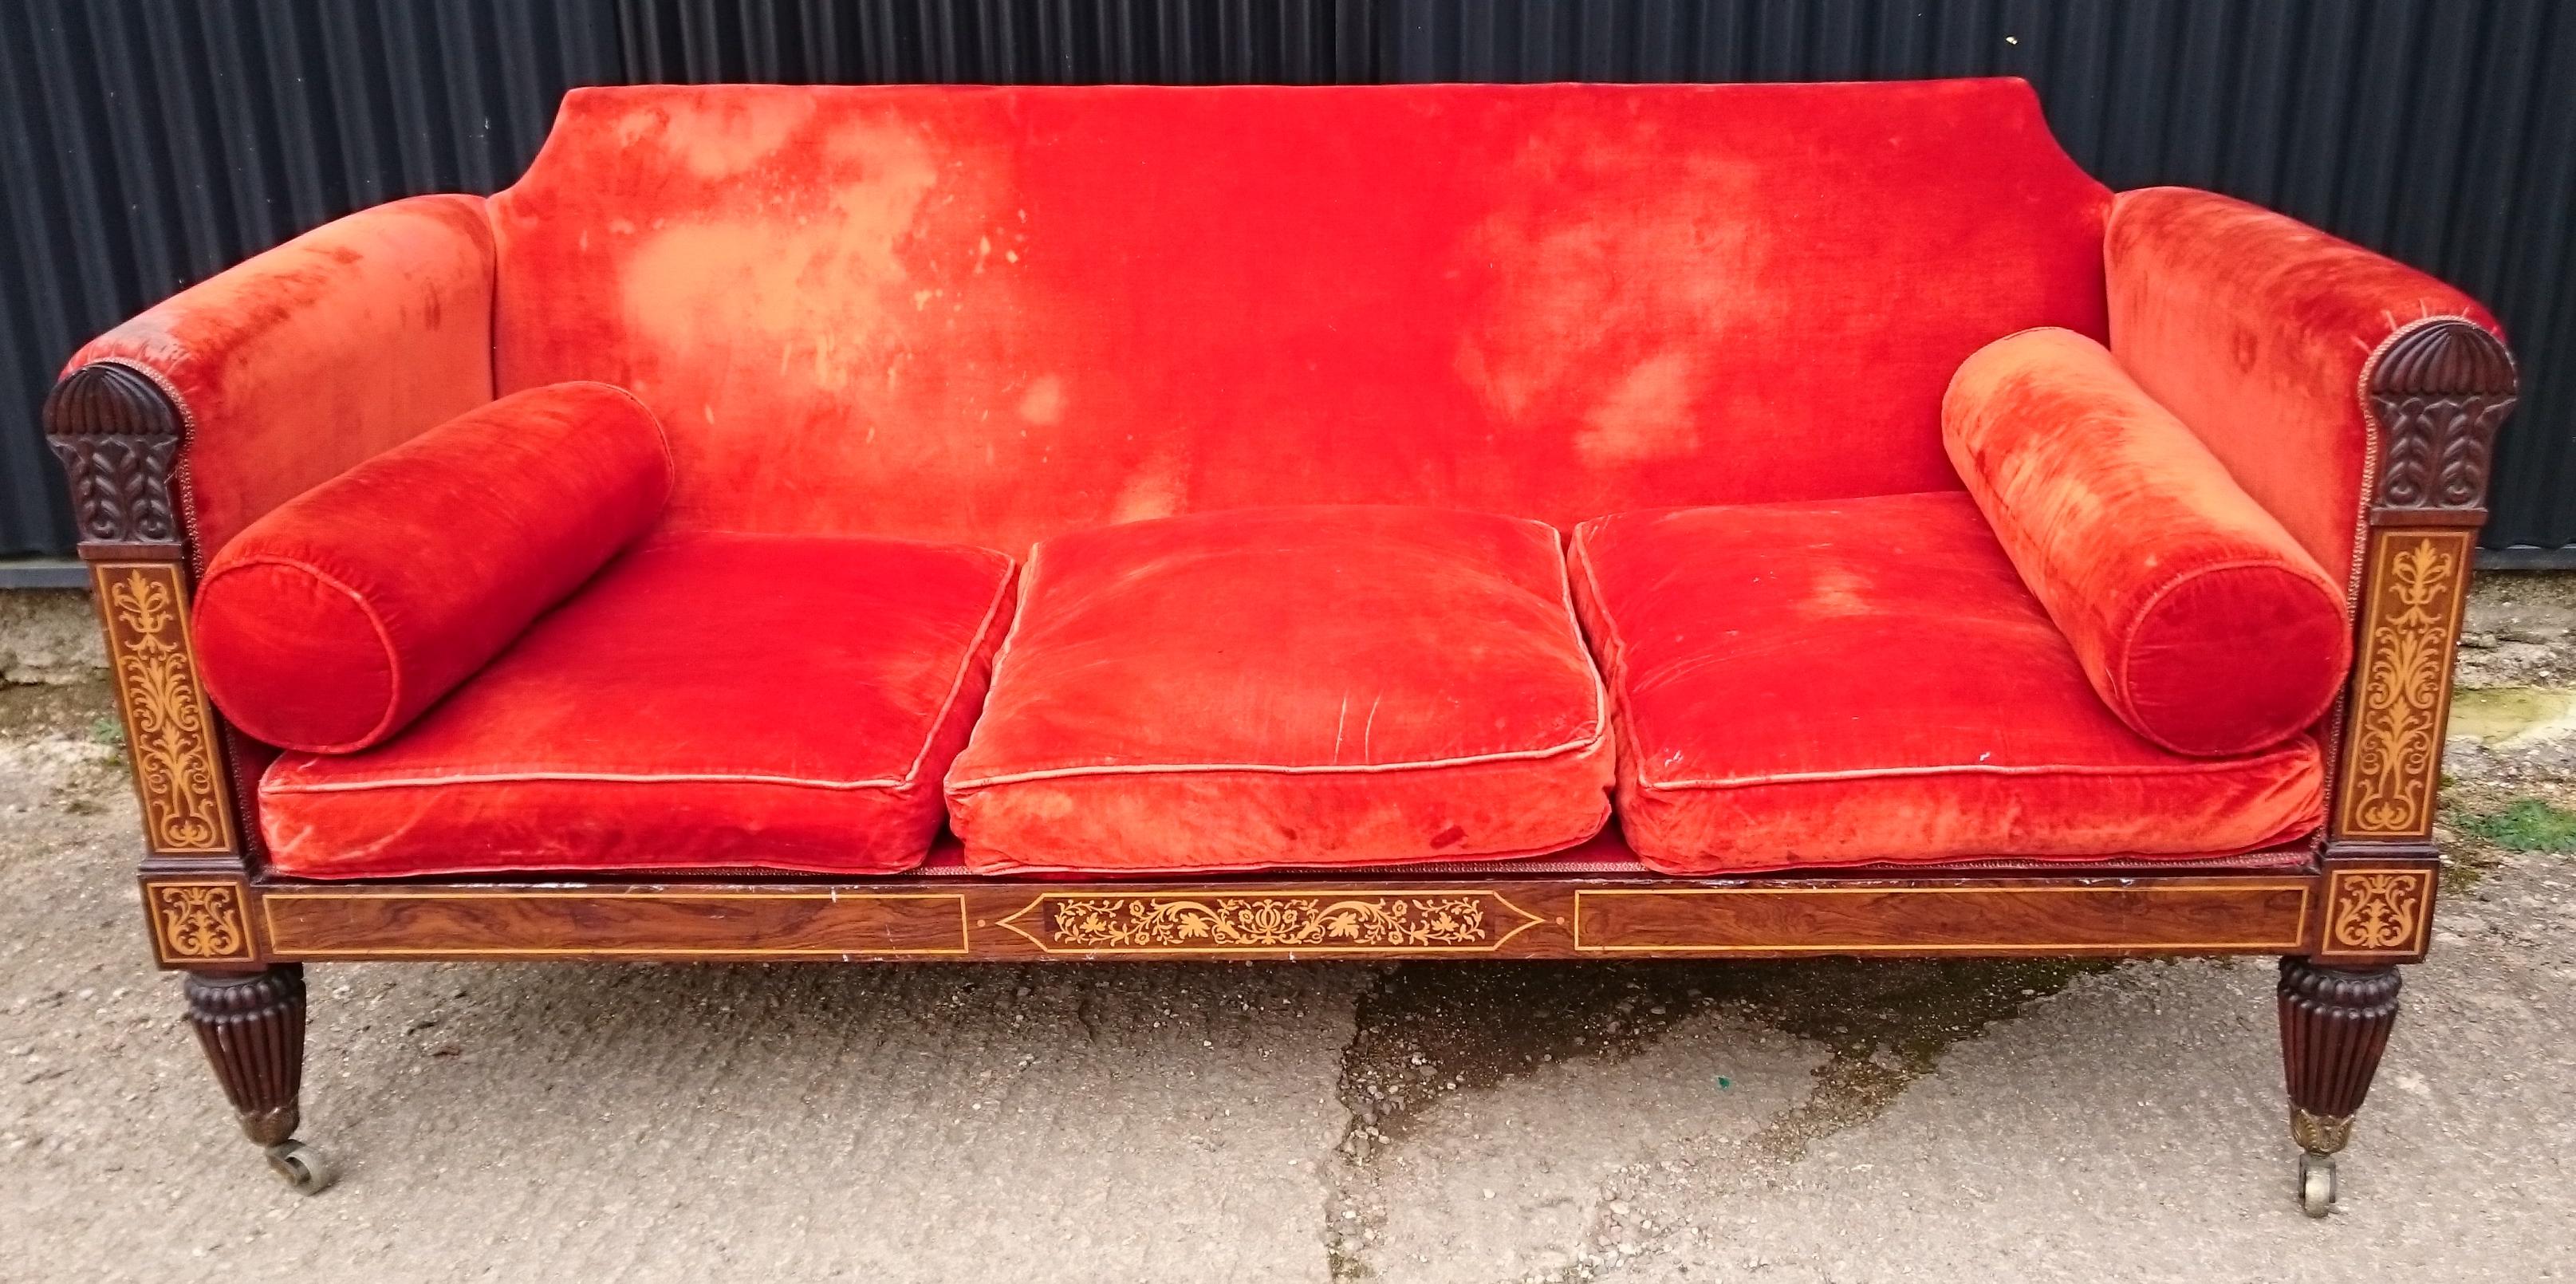 Early 19th century Regency period antique sofa. This sofa is a really fine example of classical Regency big house drawing room furniture. It has everything you could get at the period, reeded legs, acanthus carving, contra foliate scrolling,